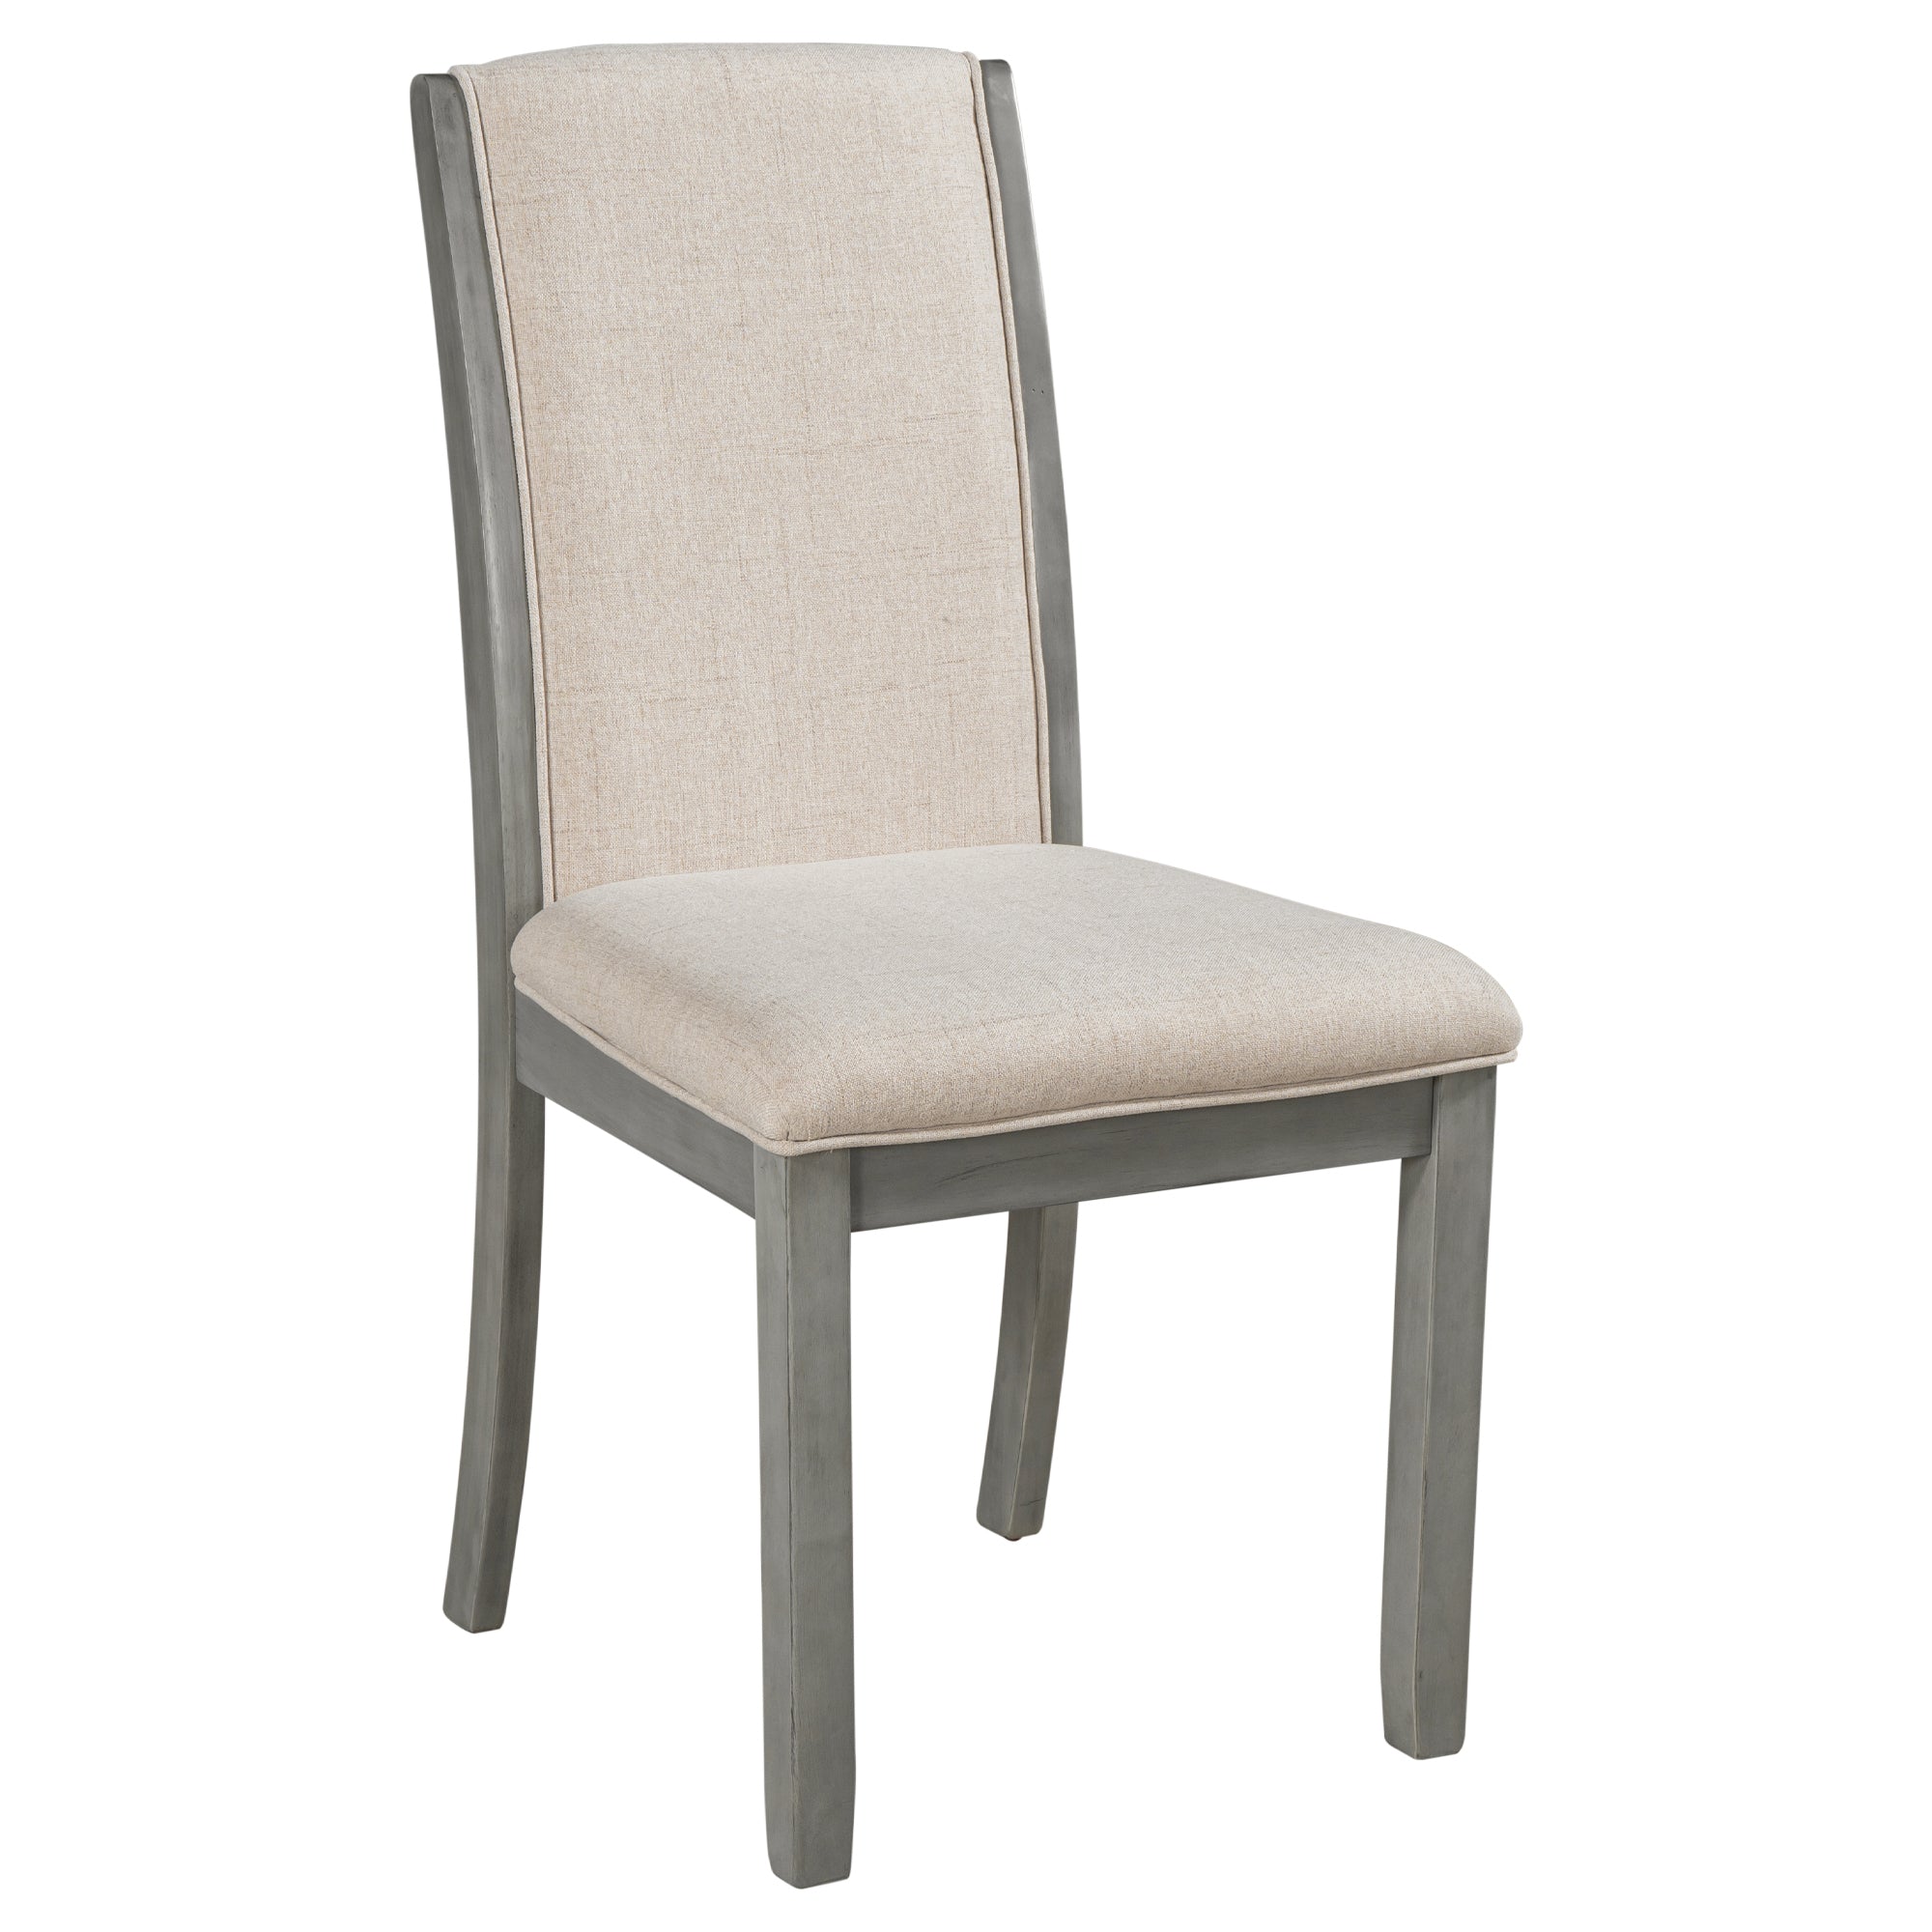 Farmhouse Wood Full Back Dining Chairs with Upholstered Cushions (Set of 4) - Grey